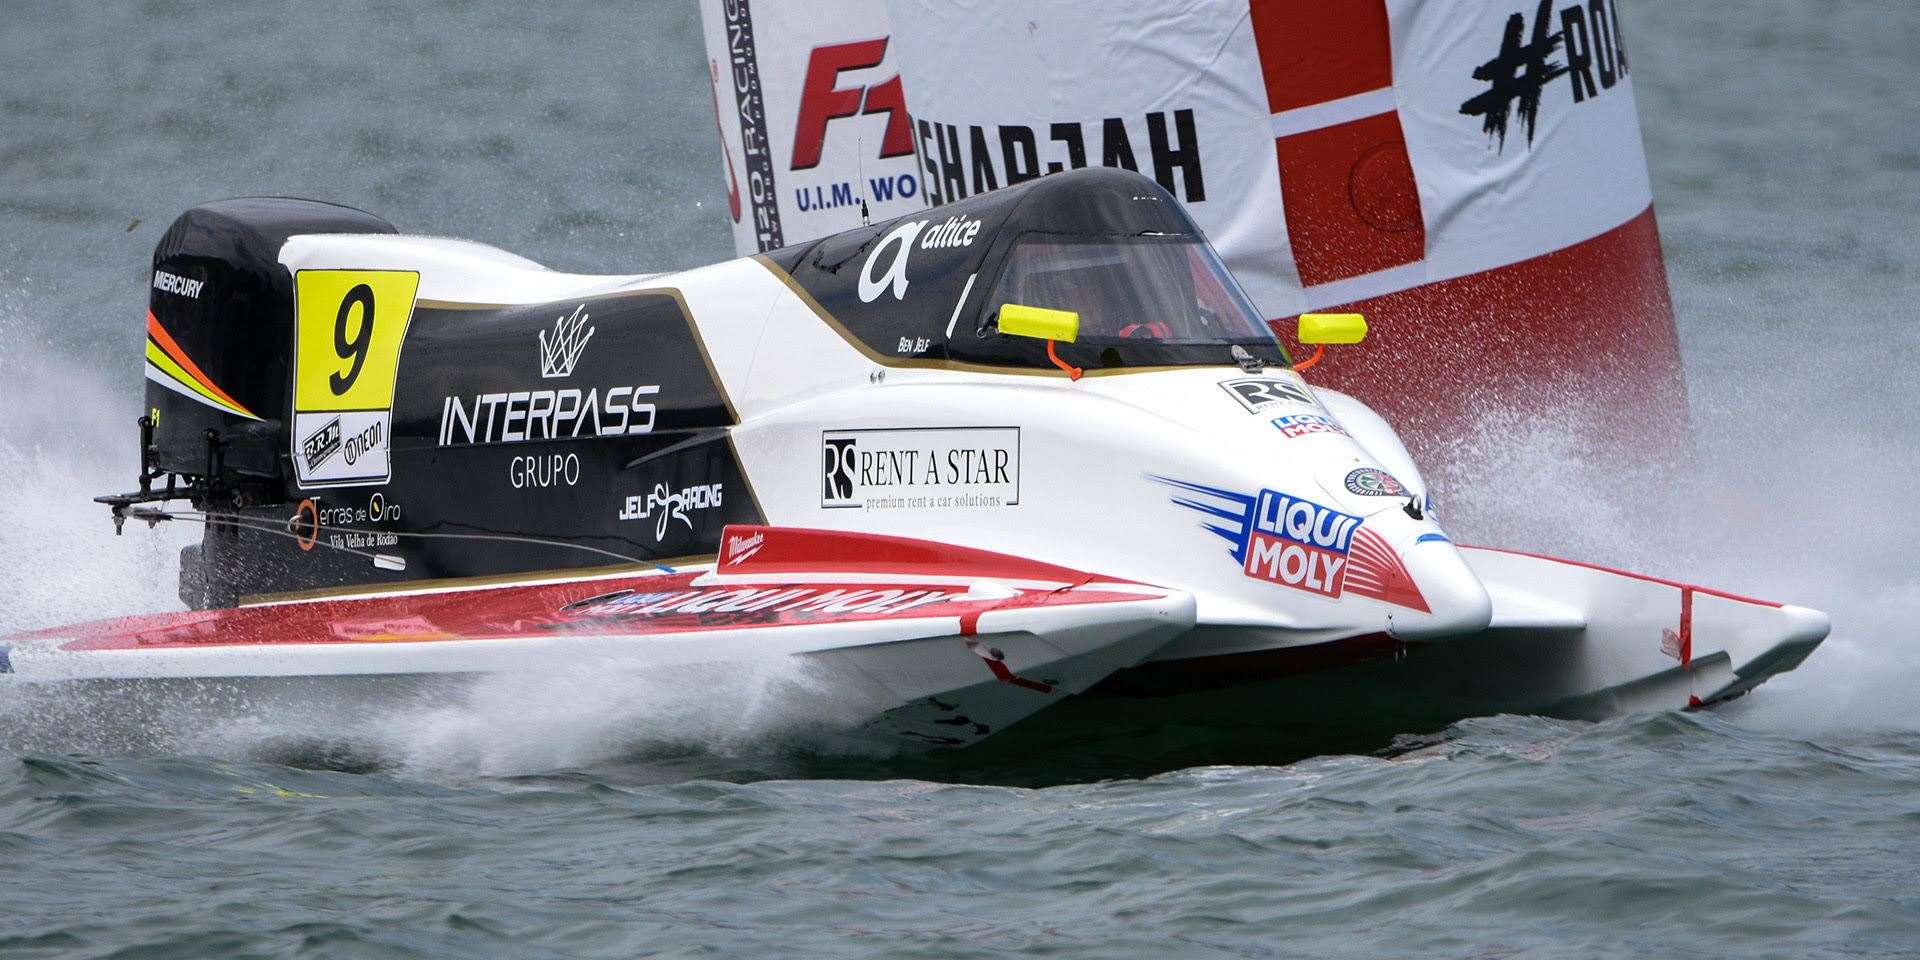 Maidstone’s Ben Jelf saw some action at Lake Toba before the event ended earlier than planned. Picture: F1H20